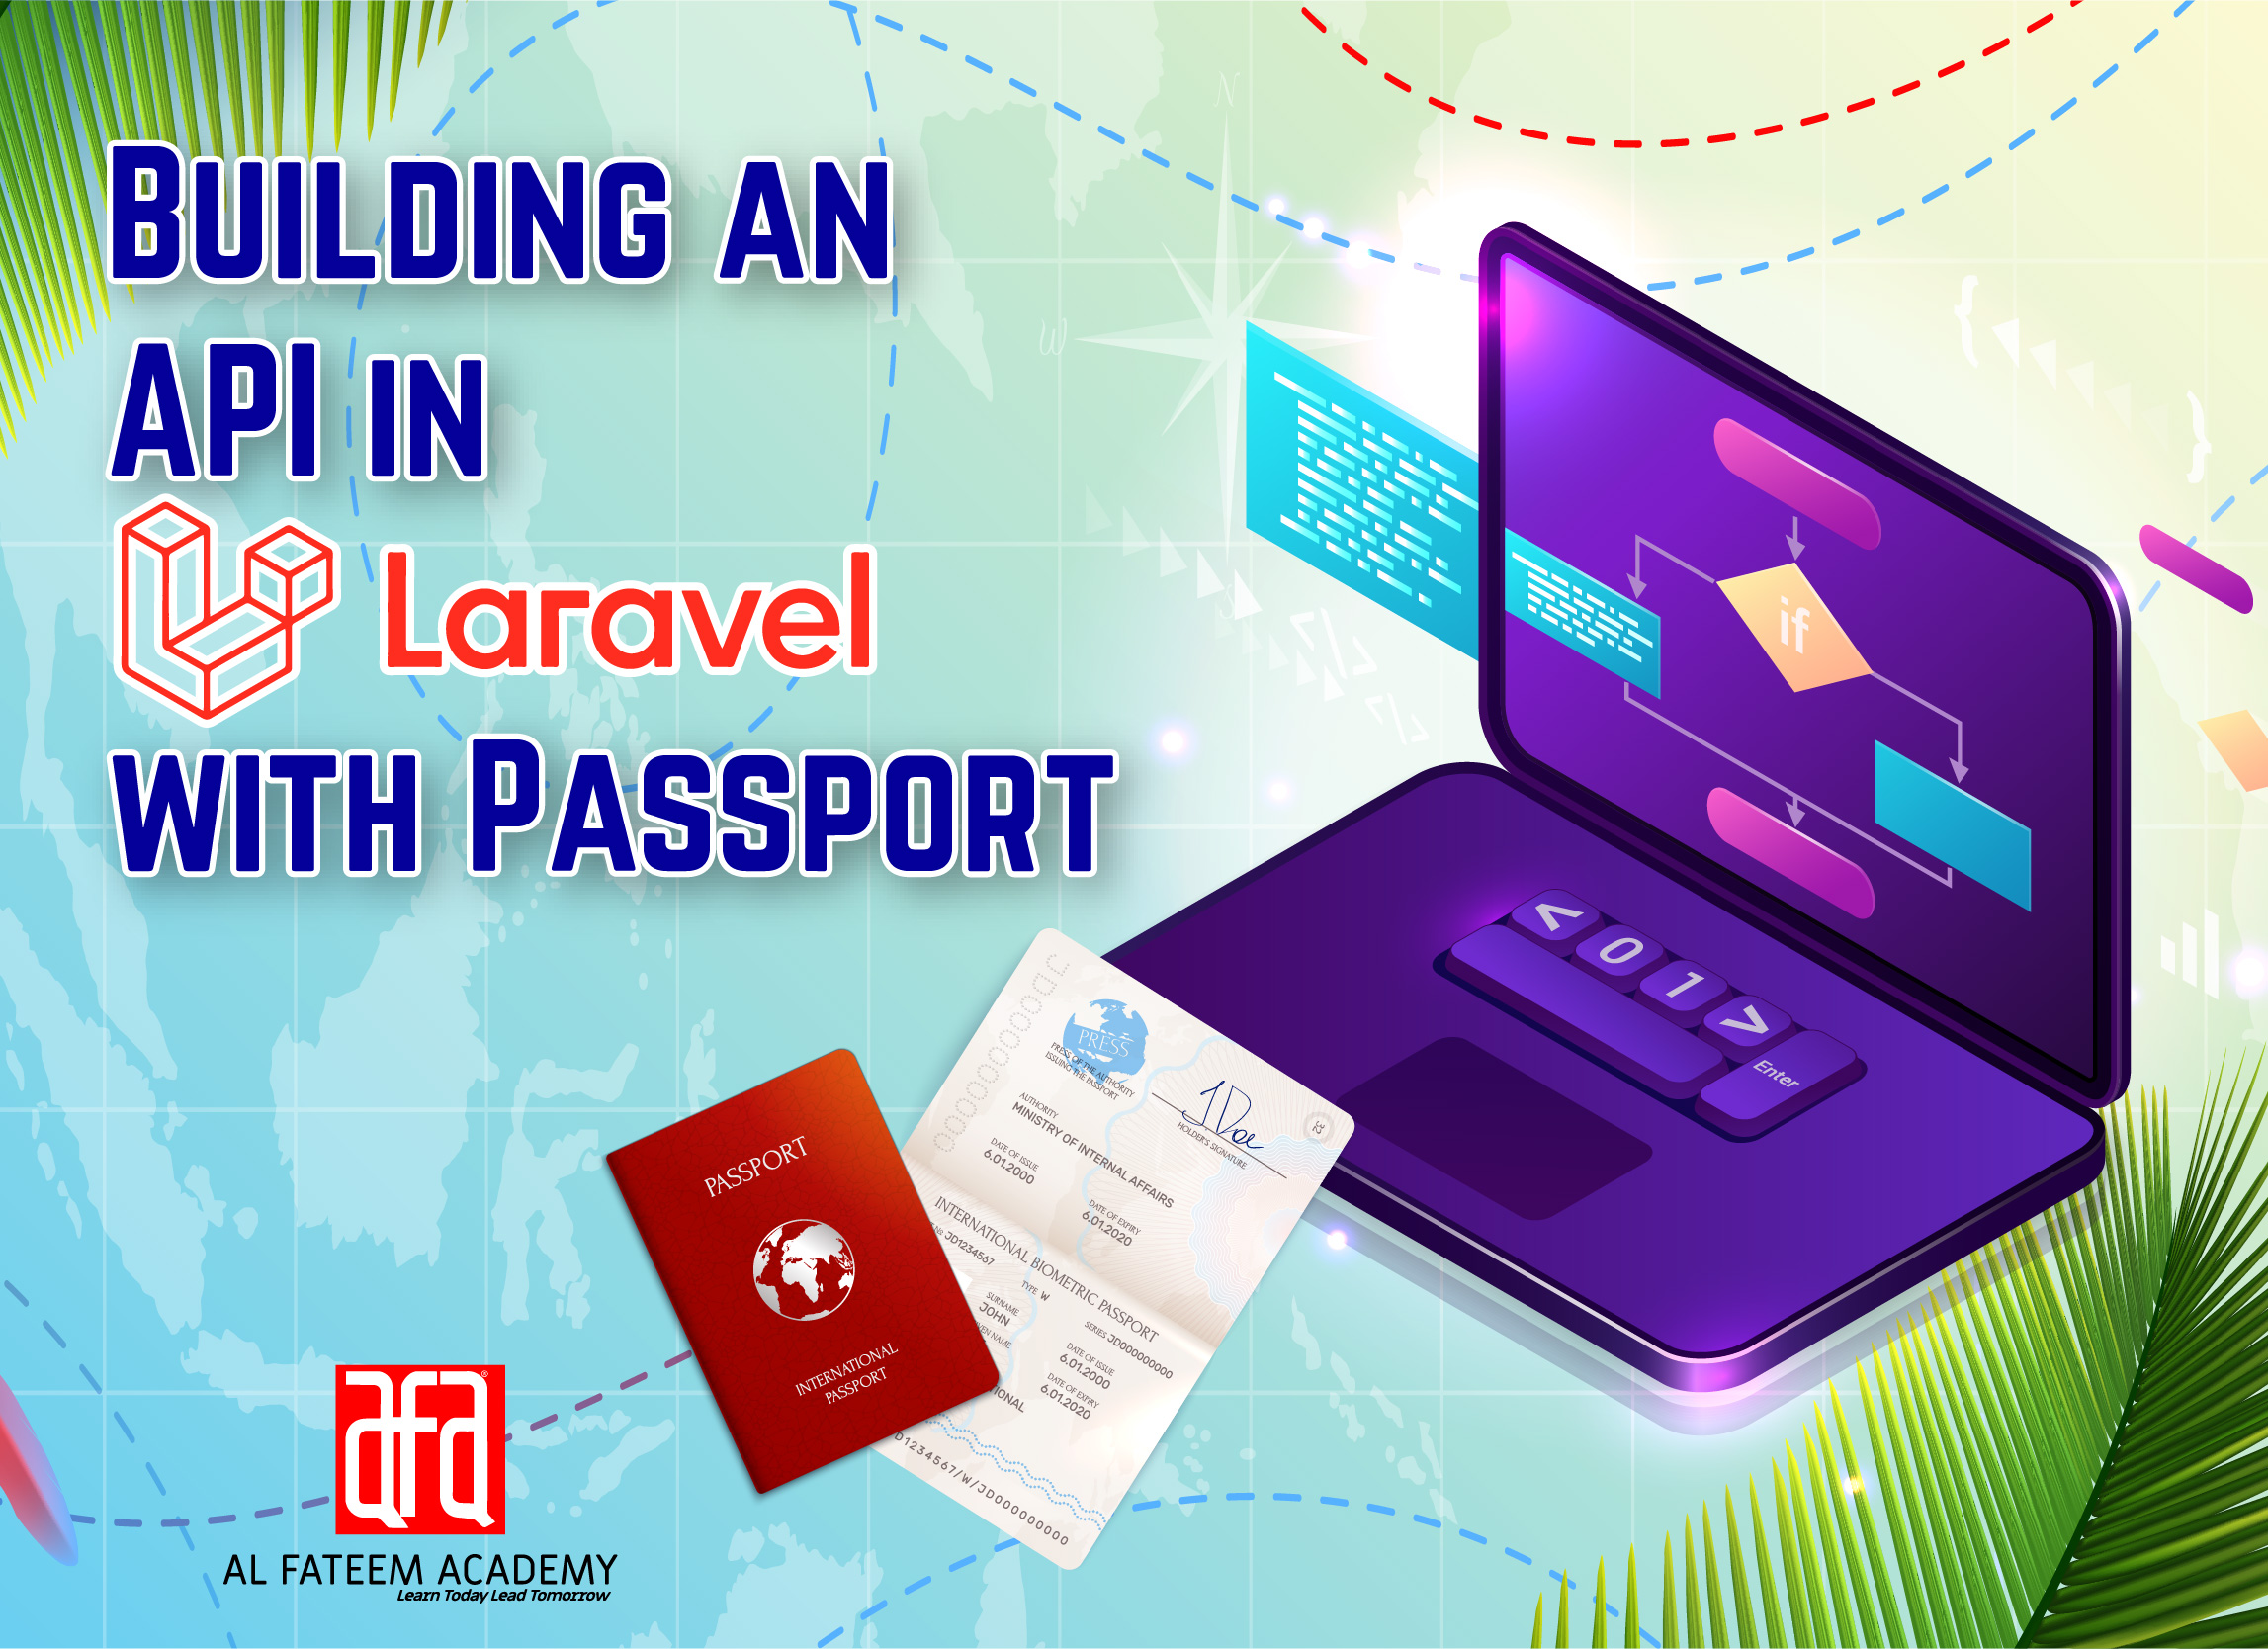 How to Building an API in Laravel With Passport?